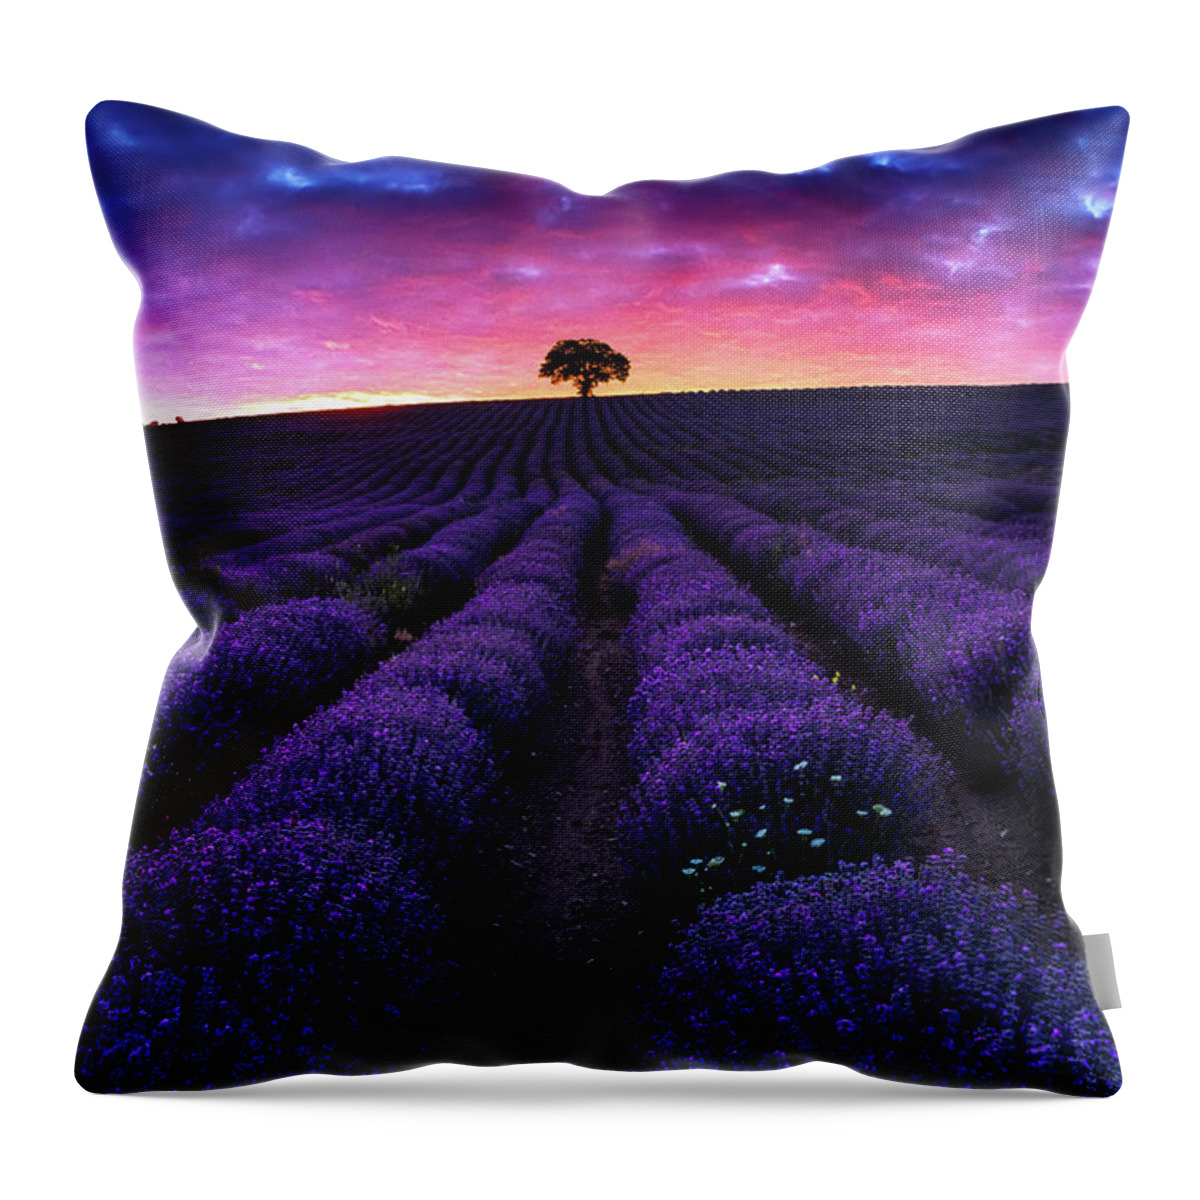 Afterglow Throw Pillow featuring the photograph Lavender Dreams by Evgeni Dinev